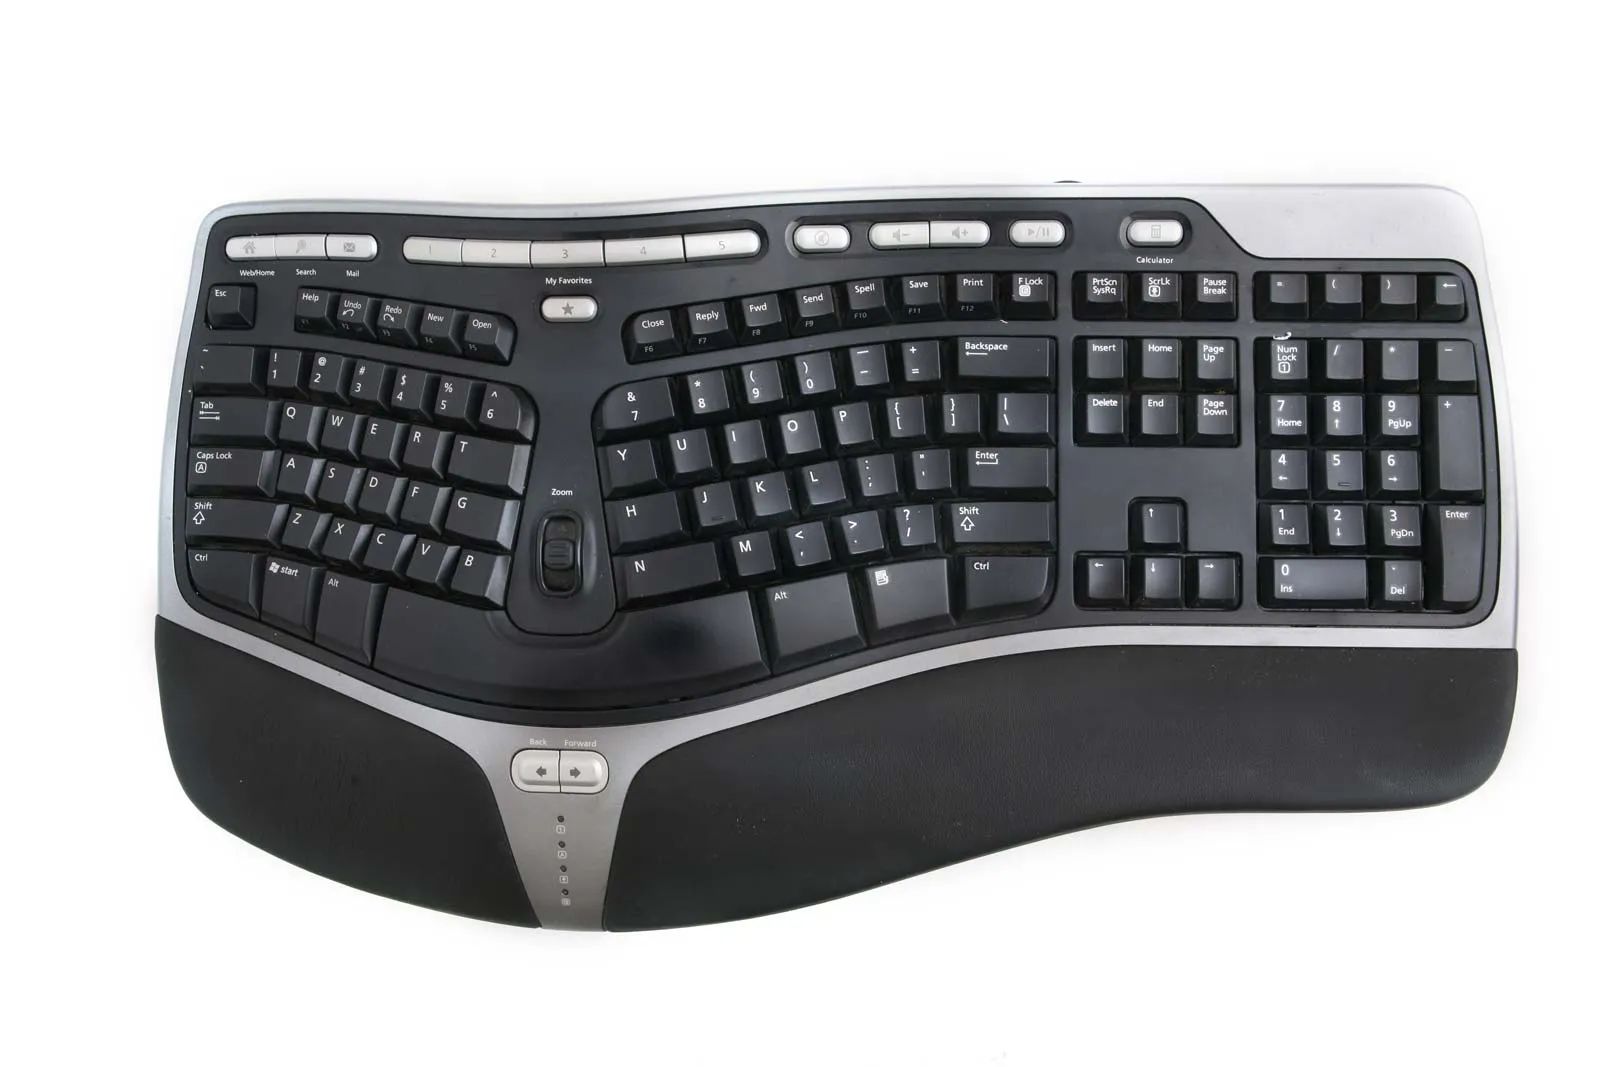 What Kind Of Device Is A Keyboard?